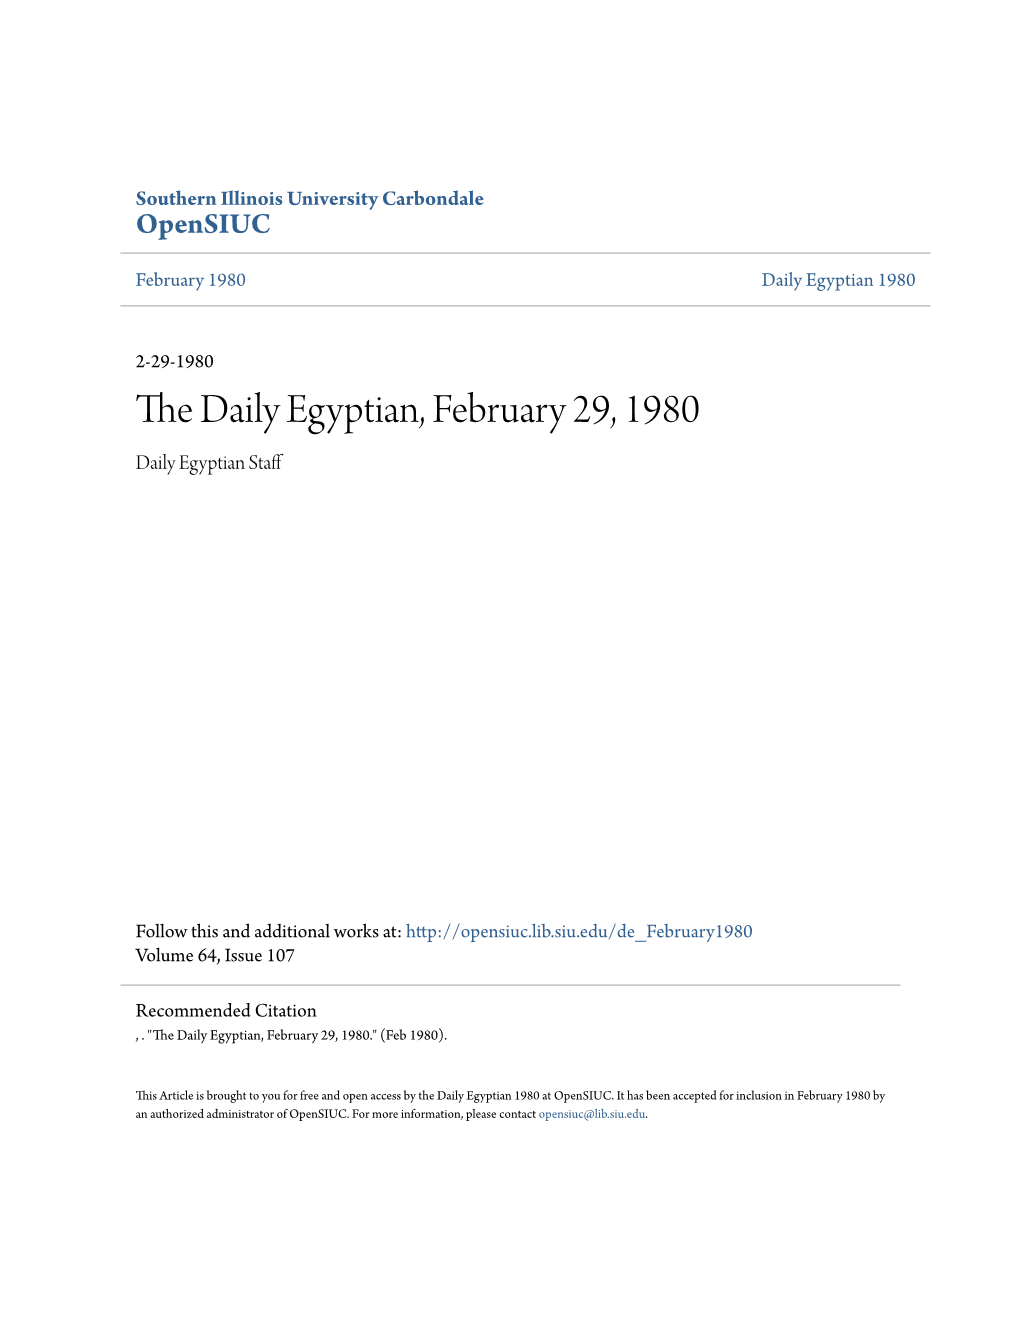 The Daily Egyptian, February 29, 1980